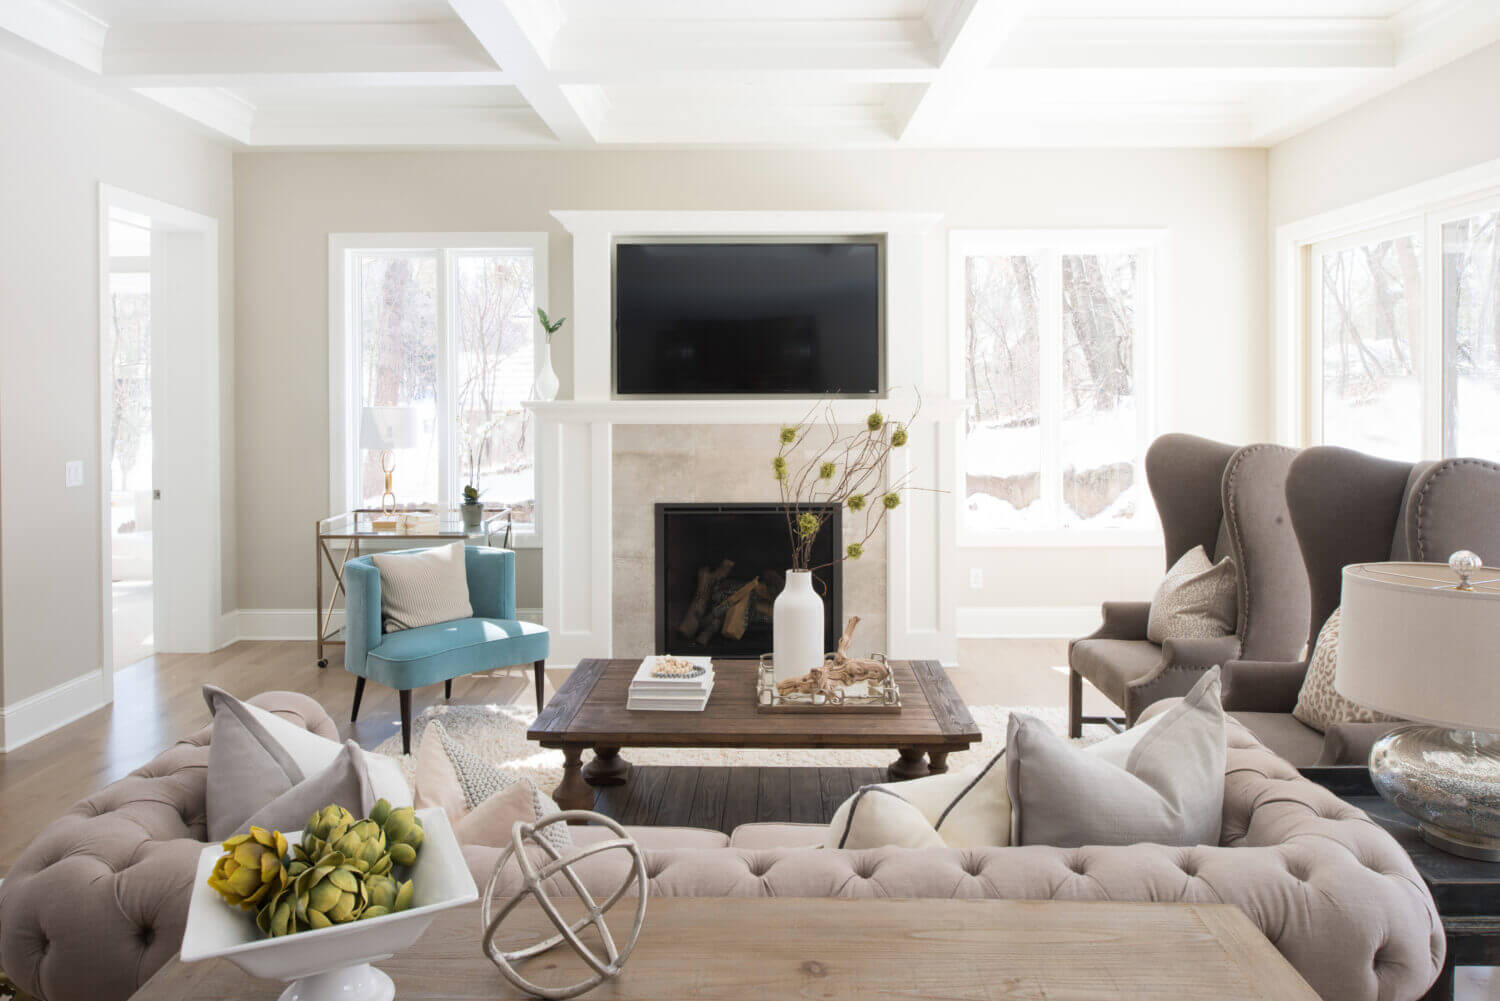 A look over the couch in the living room showing the fireplace mantel that coordinates with the kitchen cabinets and millwork throughout the home.